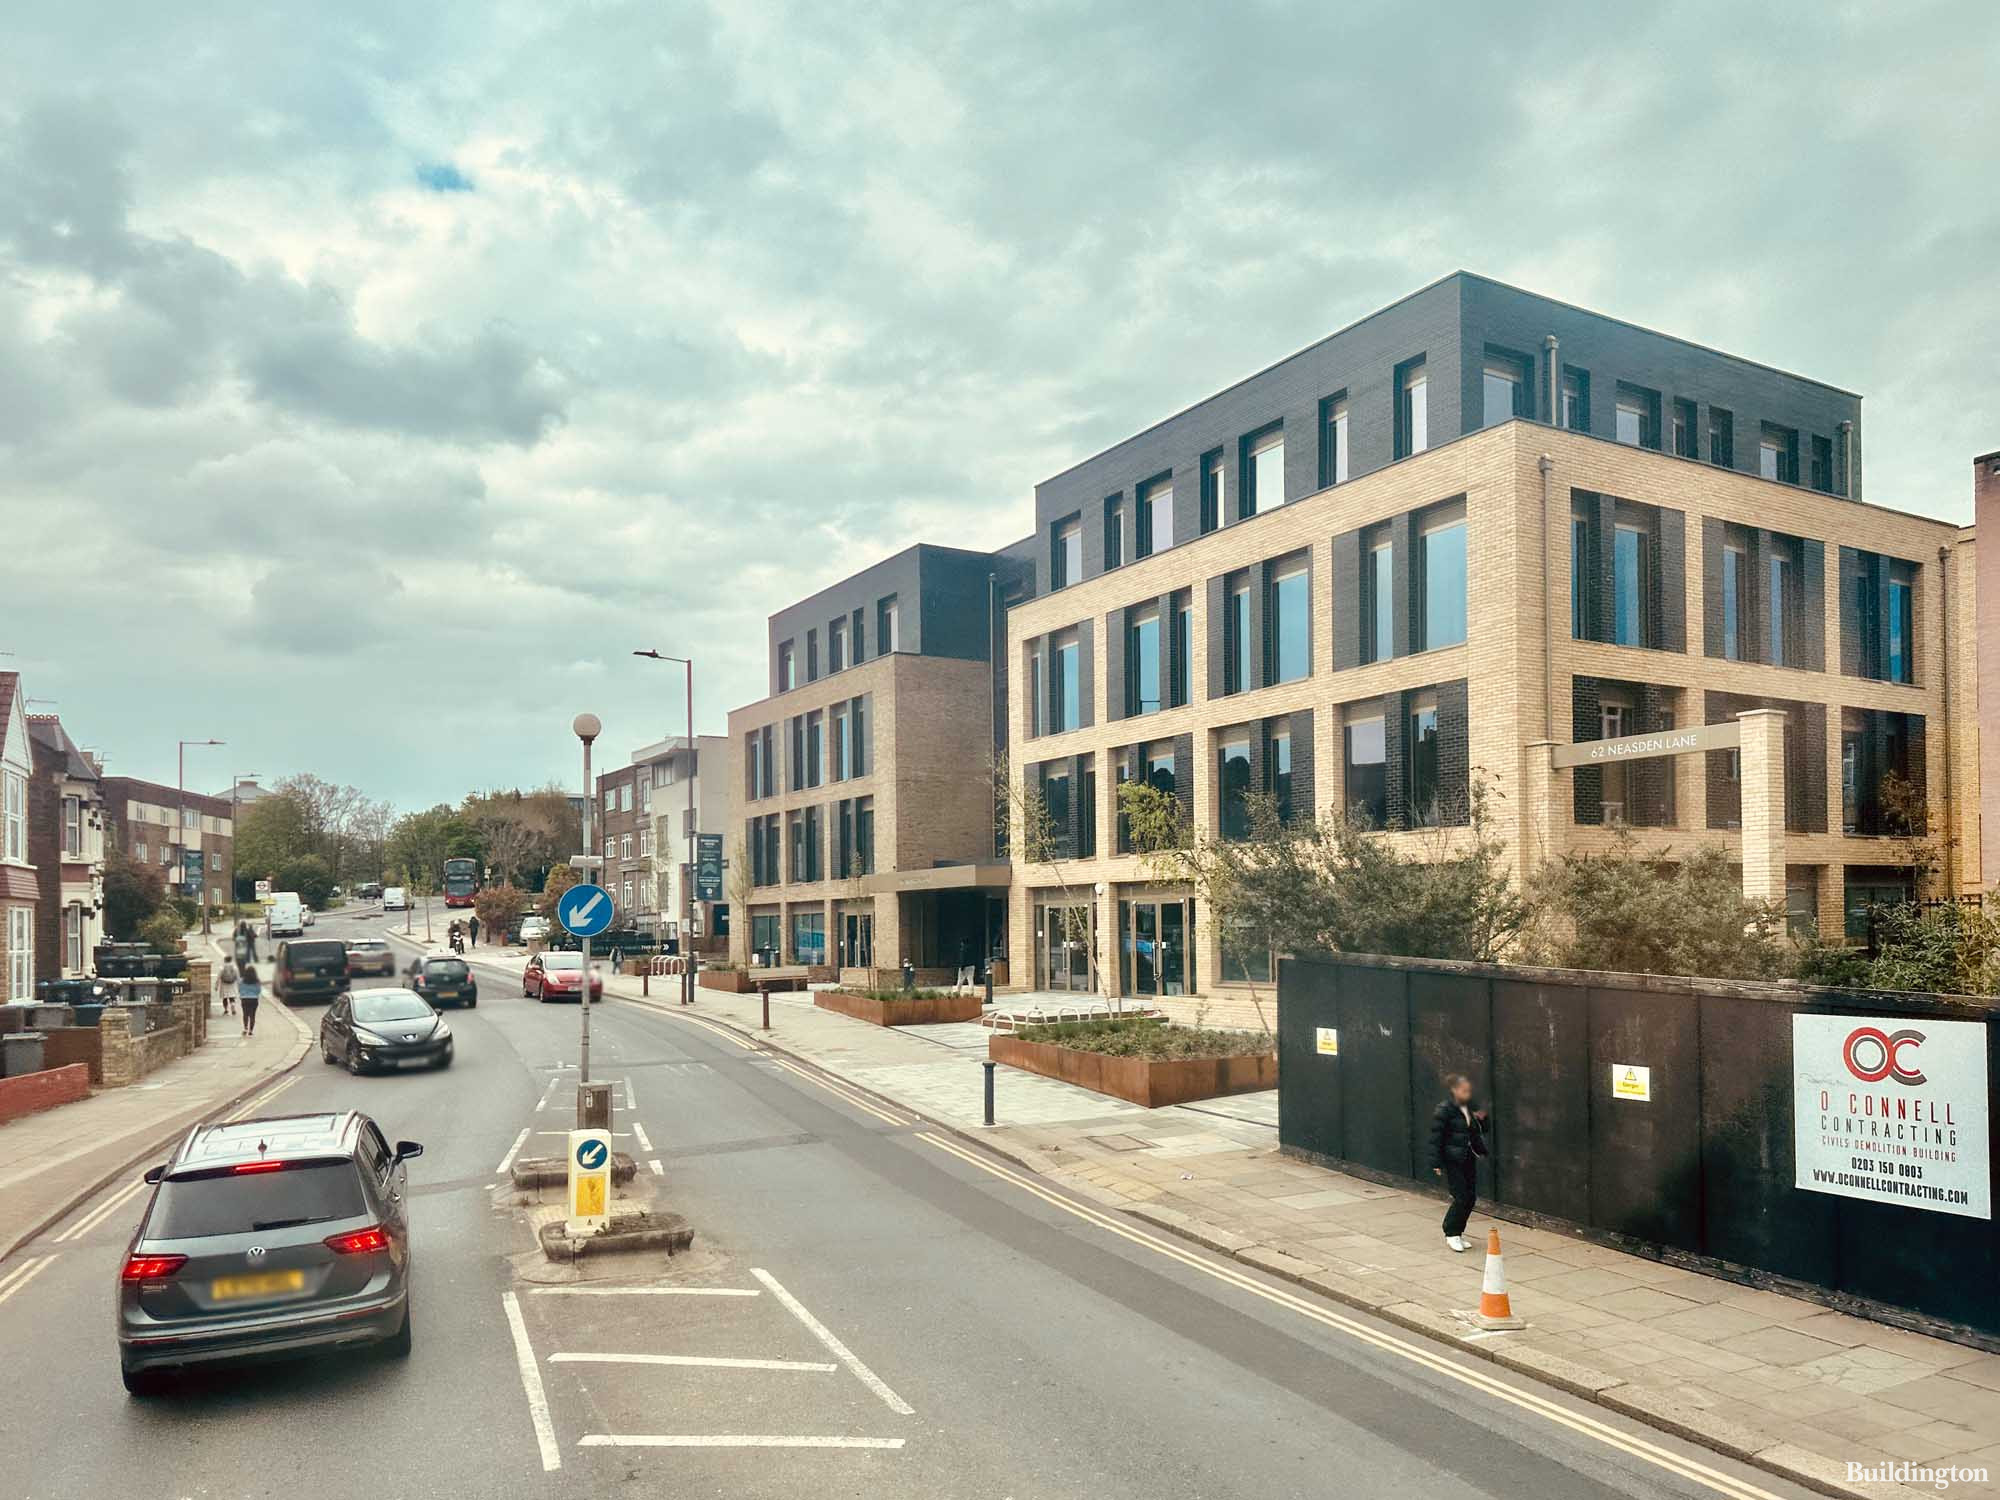 Office building on Neasden Lane by London Square